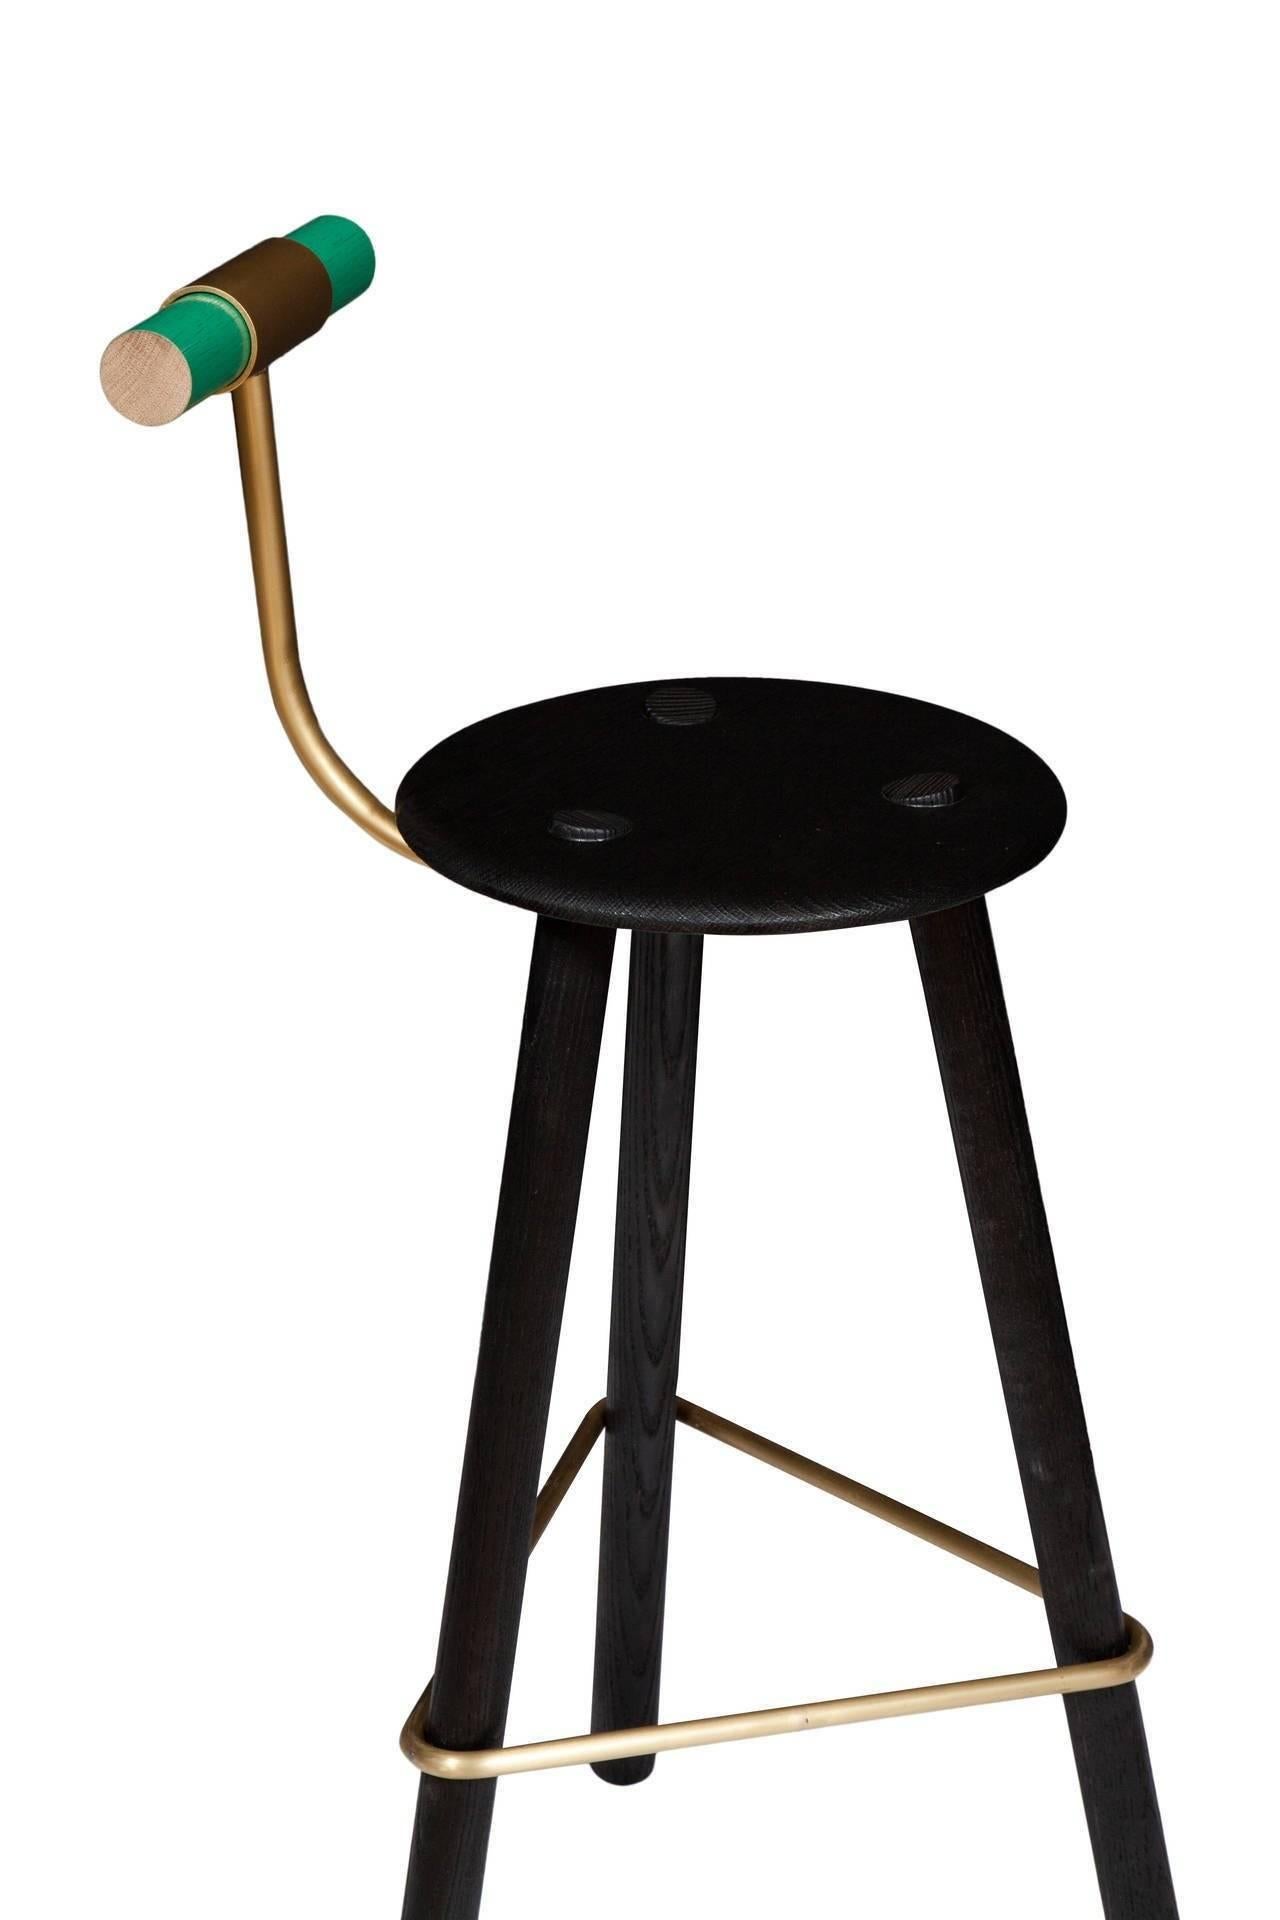 American Set of Four Erickson Aesthetics Charred Ash Tripod Stools with Backrest For Sale